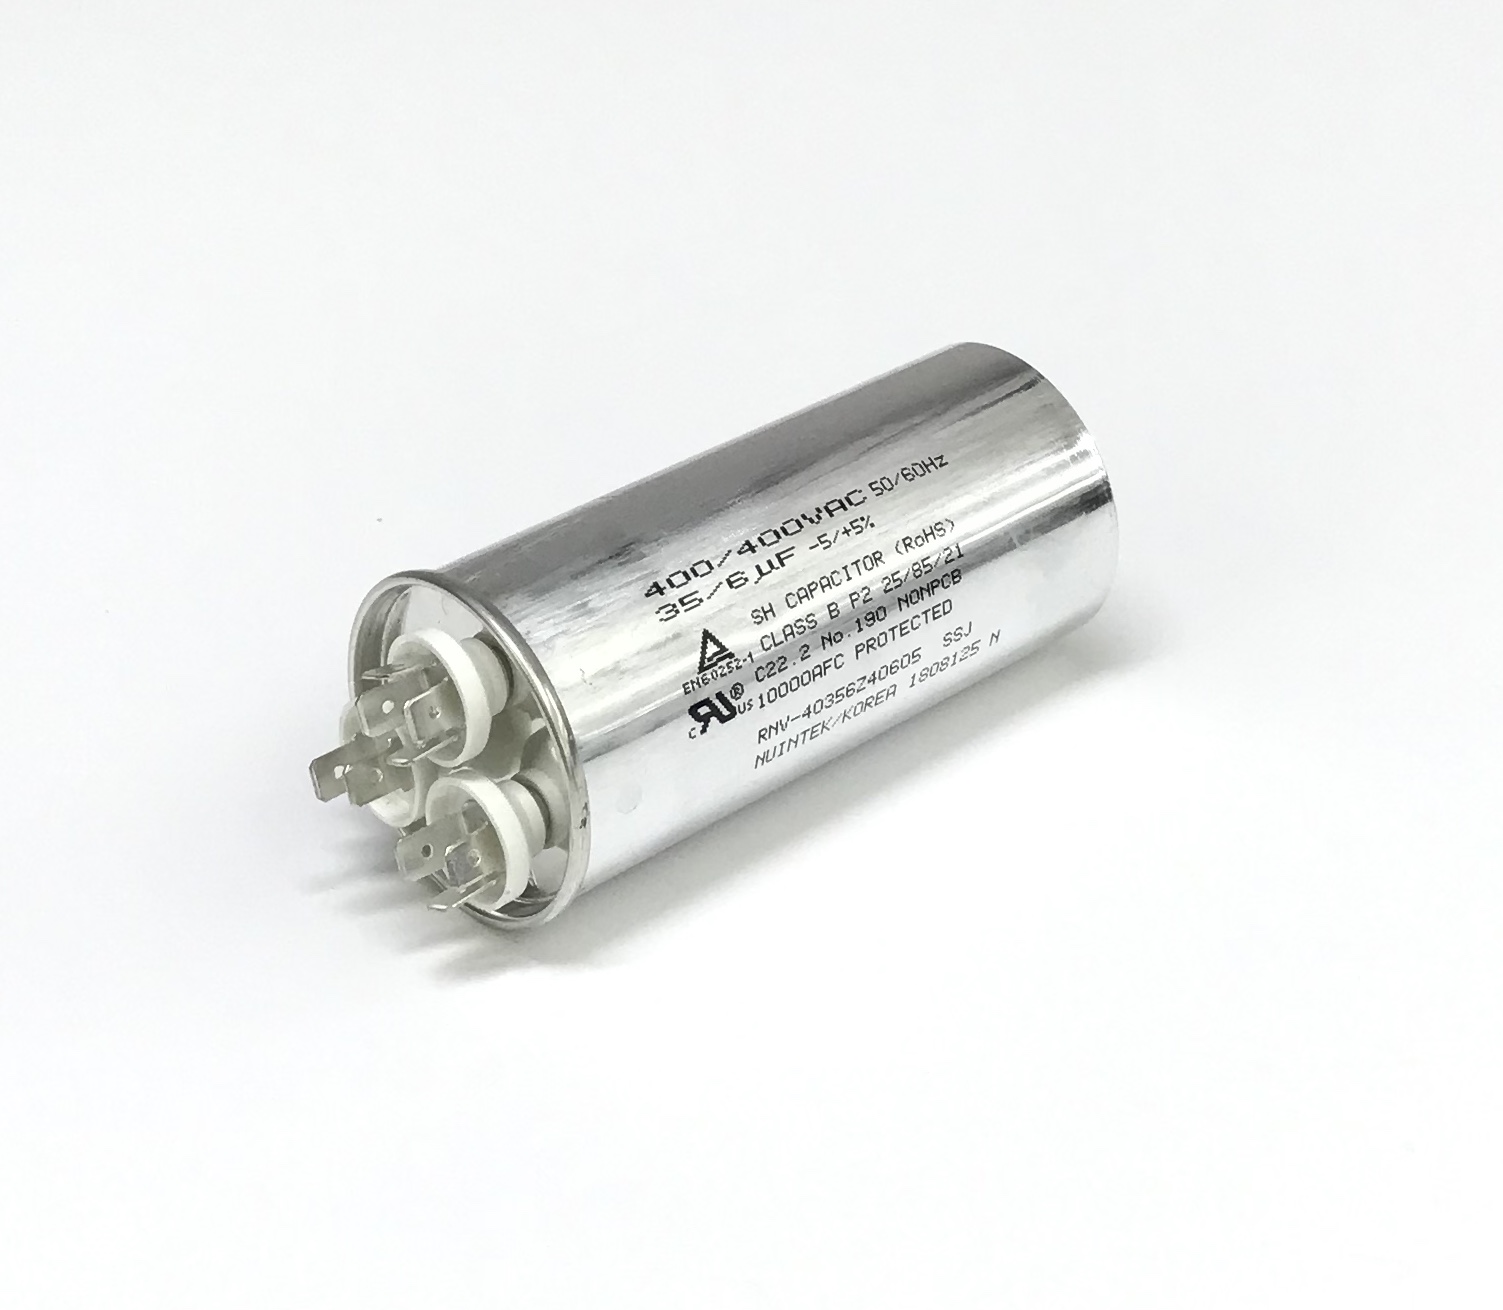 LG Air Conditioner AC Capacitor Shipped With REG183A, UWC183PDMK1, UXC103BLMK1